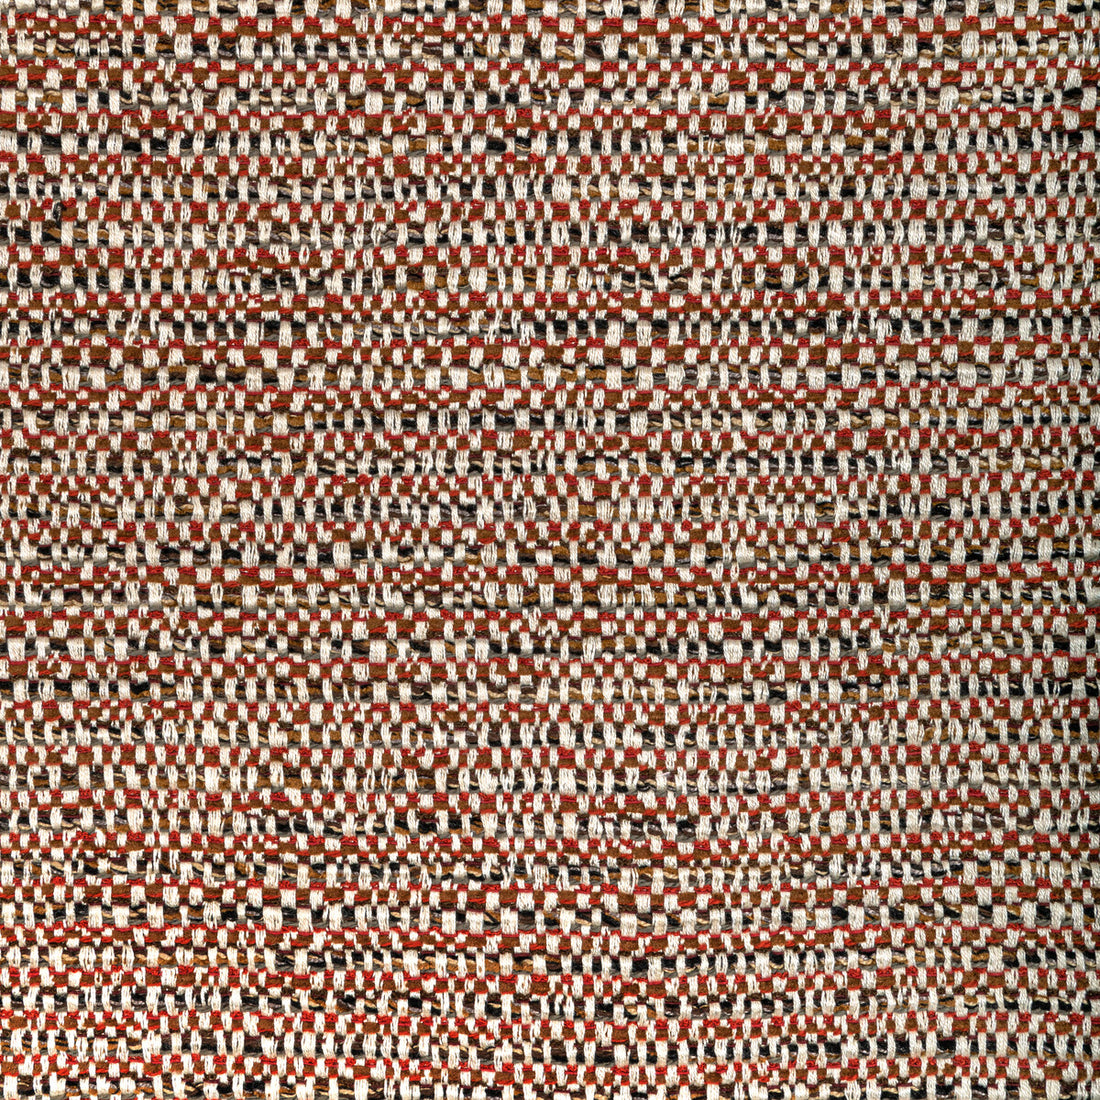 Kravet Design fabric in 36417-619 color - pattern 36417.619.0 - by Kravet Design in the Performance Crypton Home collection